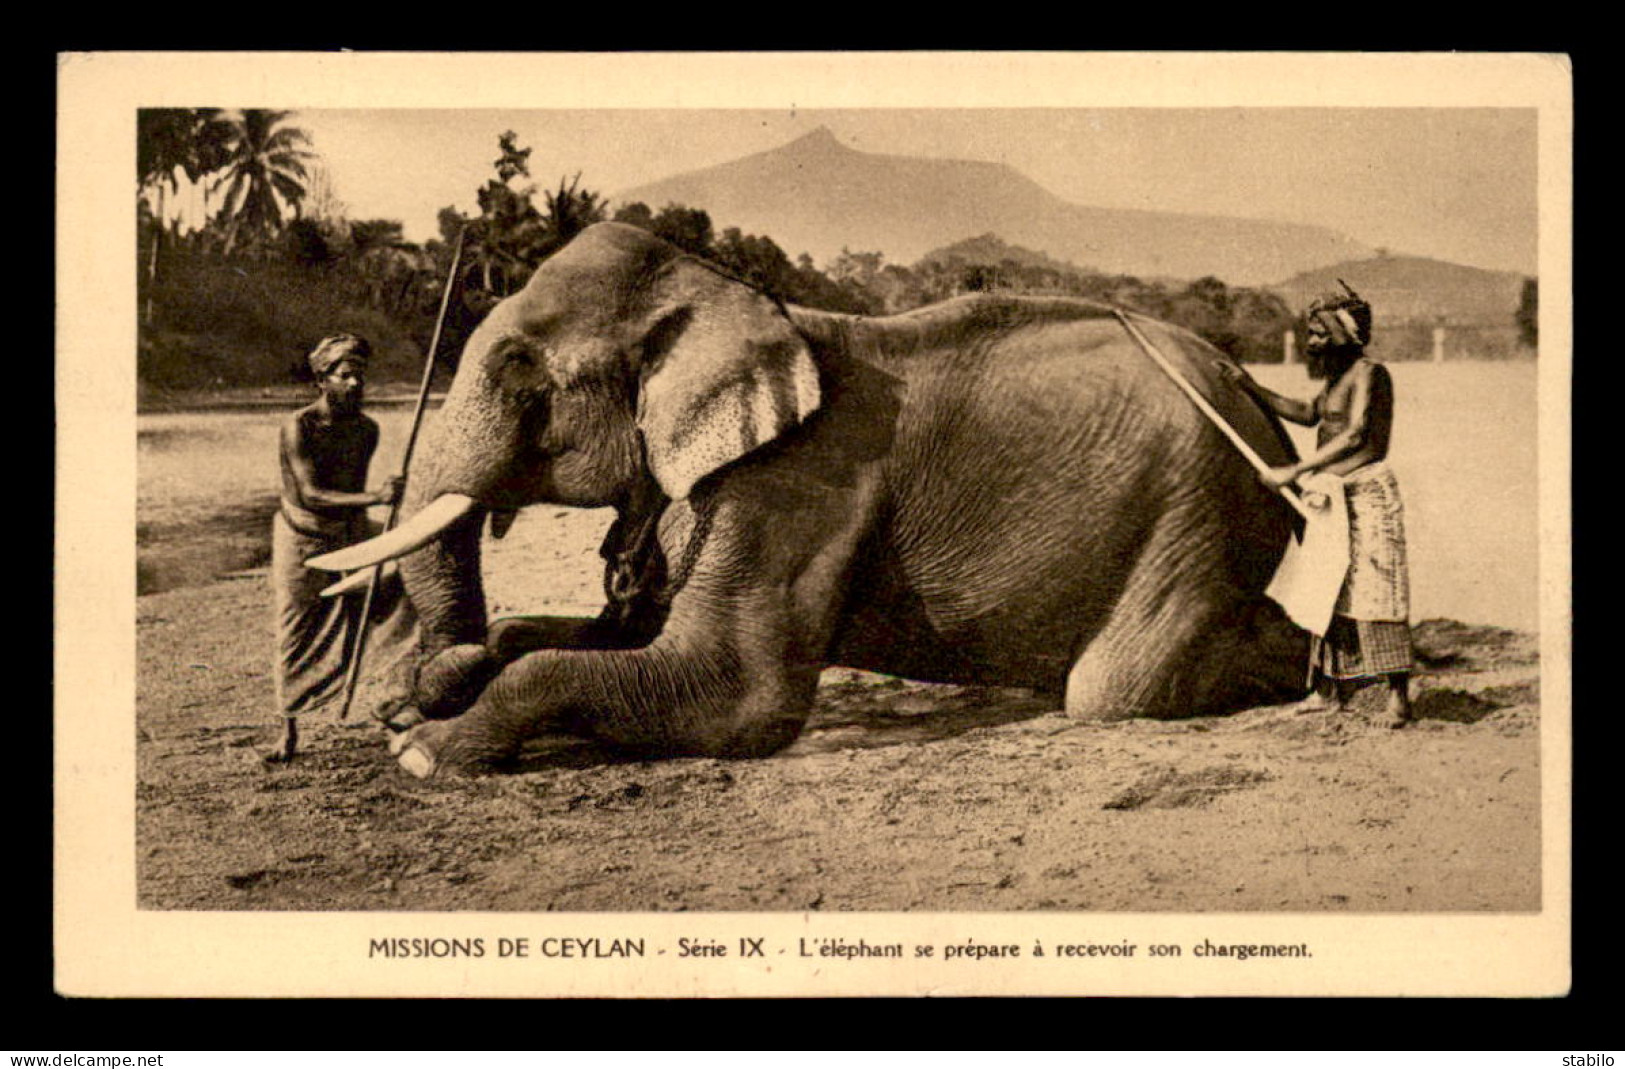 MISSIONS - CEYLAN - OBLATS DE MARIE IMMACULEE - ELEPHANT RECEVANT SON CHARGEMENT - Missioni